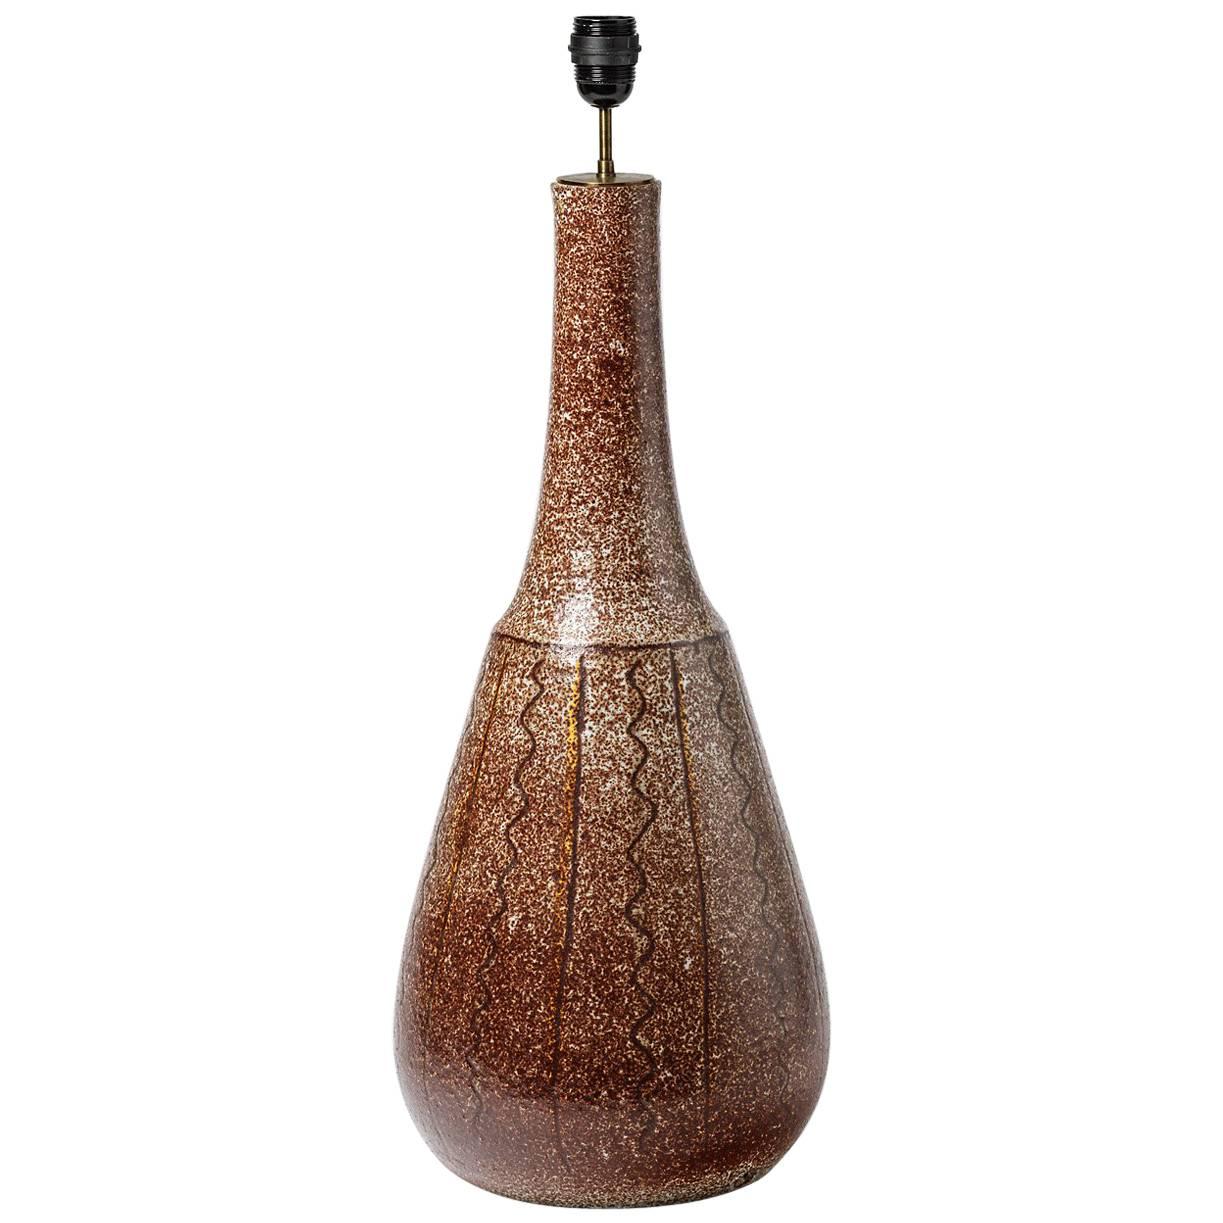 Ceramic Lamp with Brown Glaze Decoration, Signed under the Base, 1970